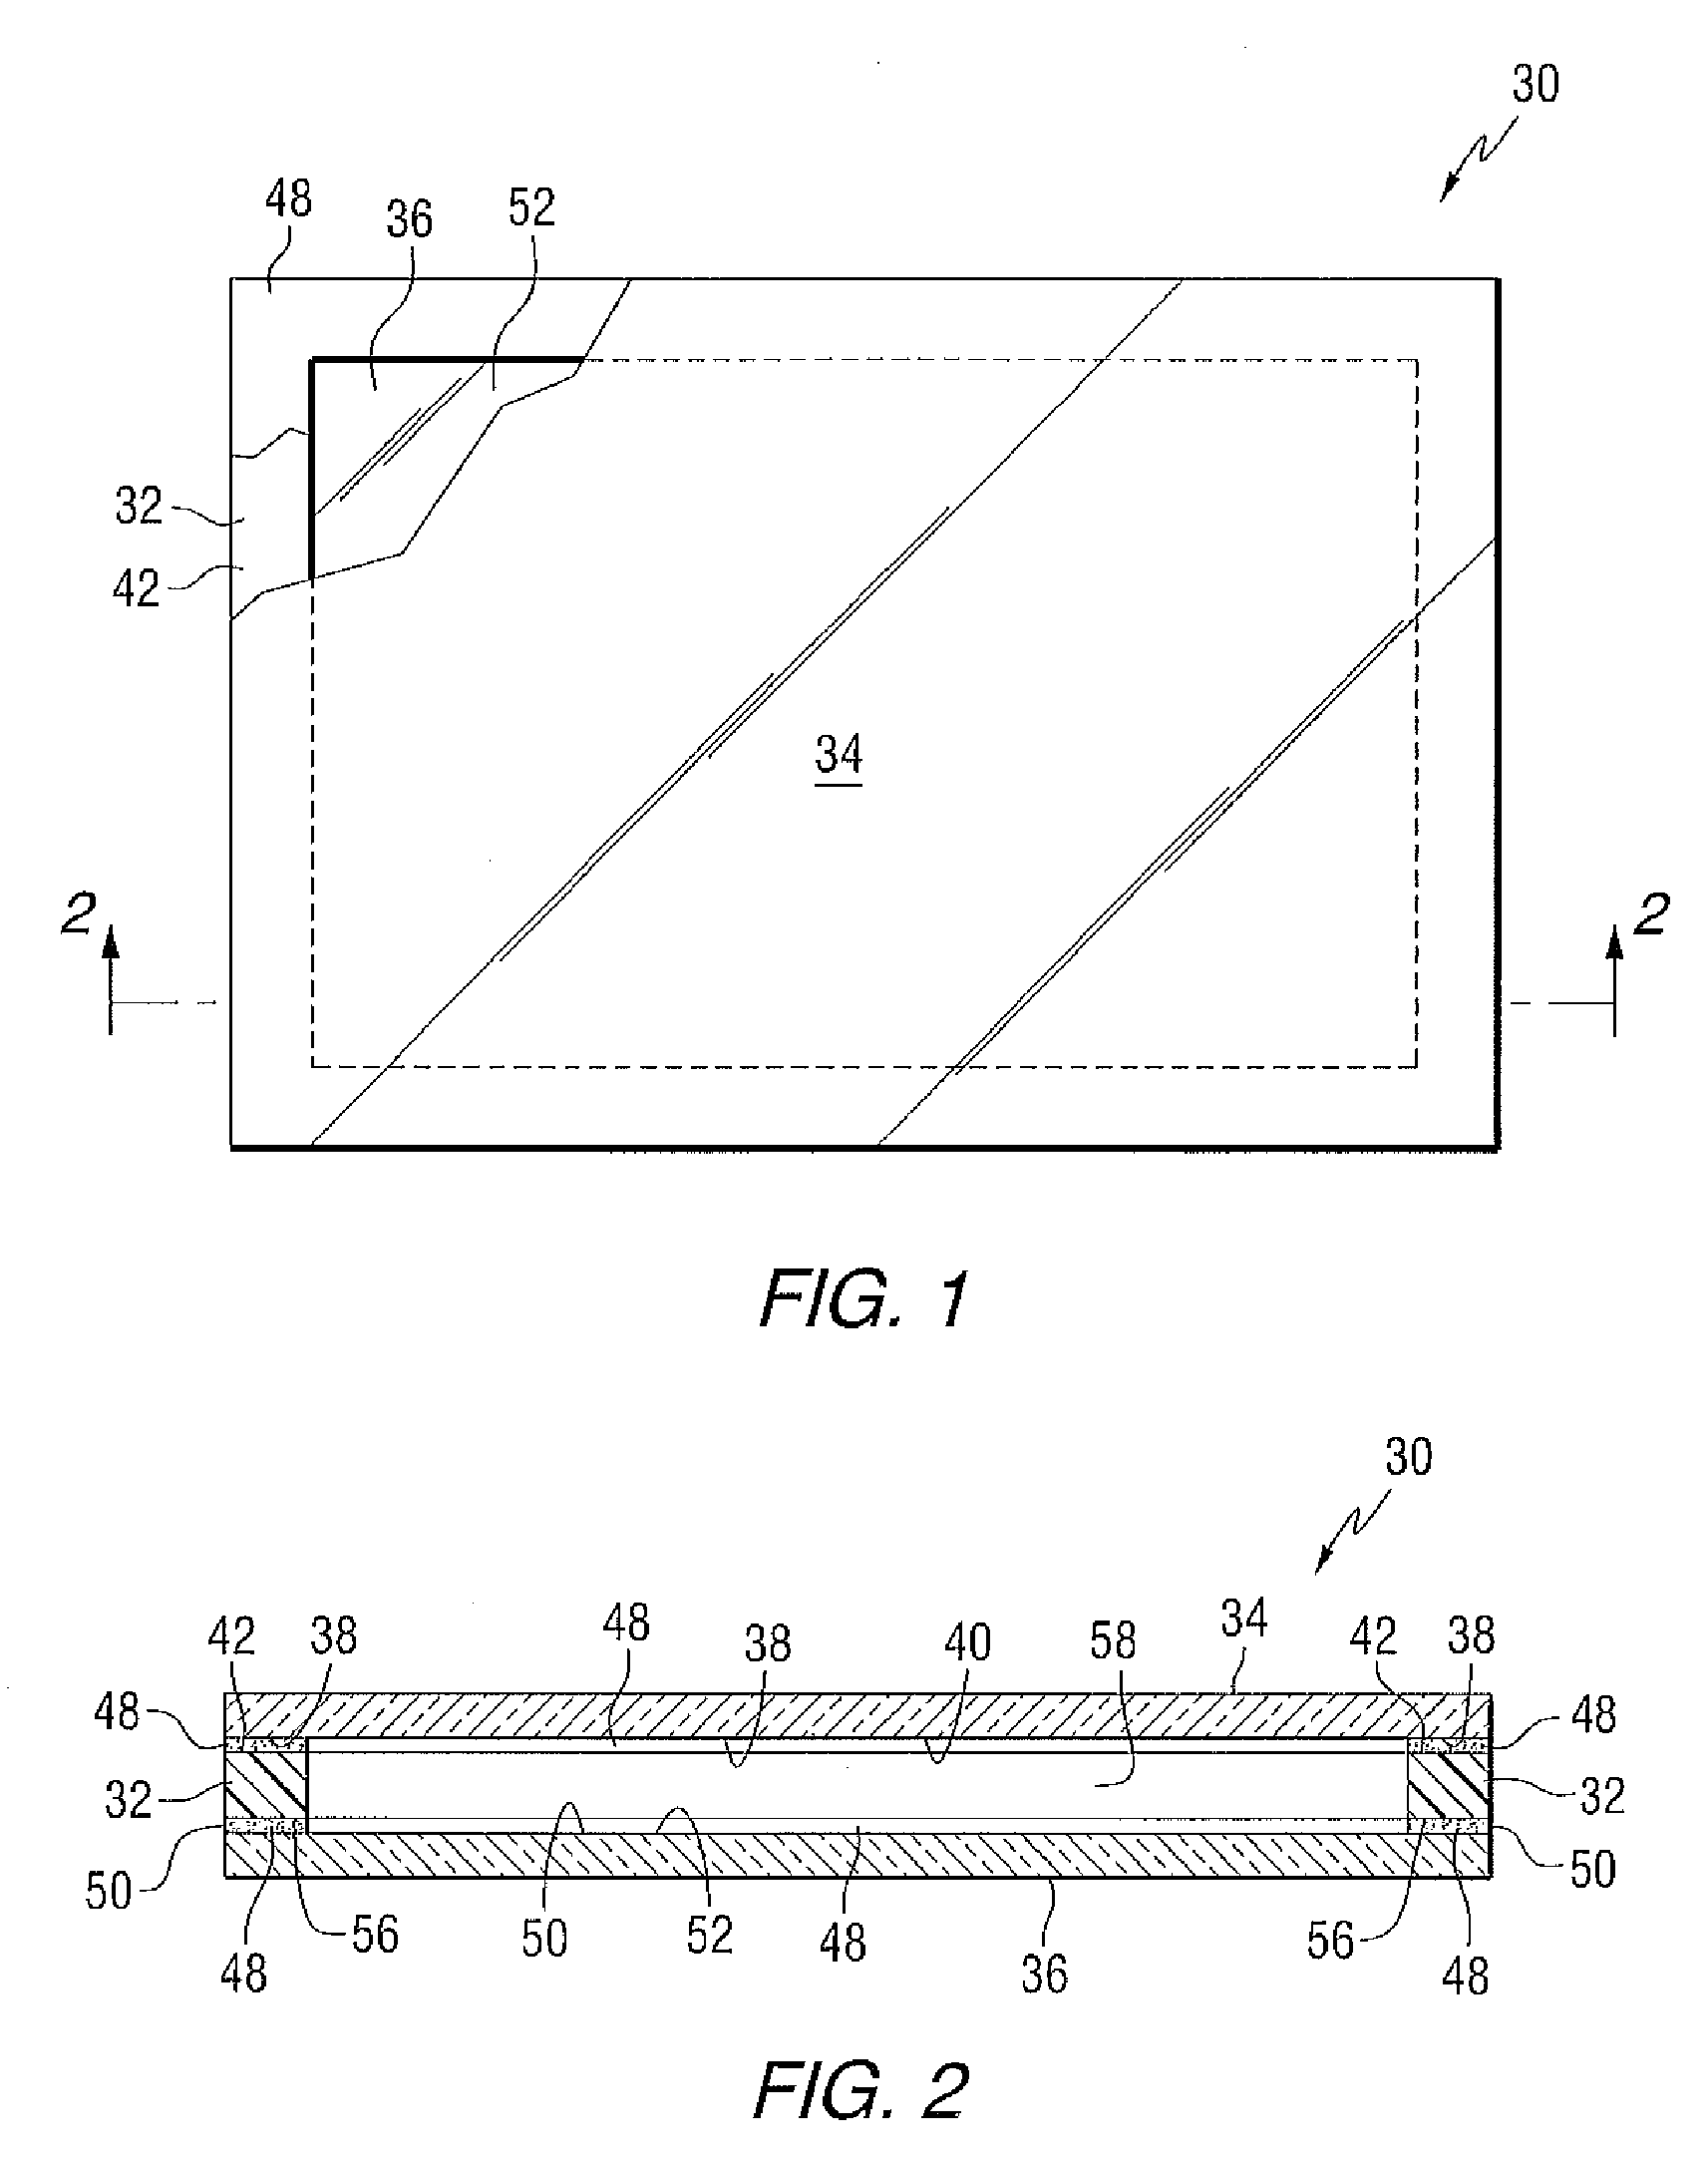 Plastic spacer stock, plastic spacer frame and multi-sheet unit, and method of making same